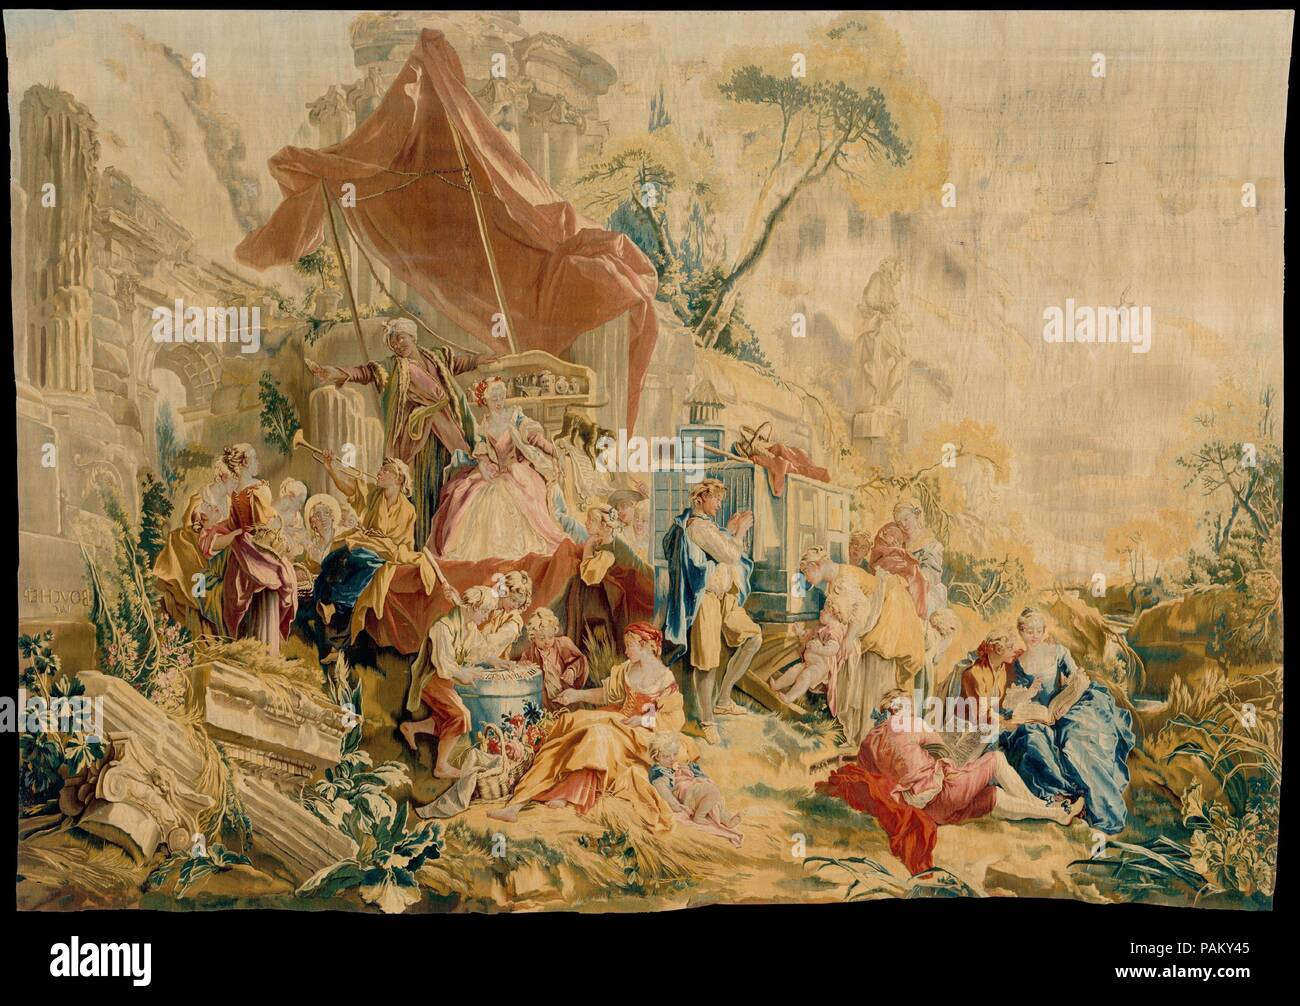 The Charlatan and the Peep Show from a set of the Italian Village Scenes. Culture: French, Beauvais. Designer: Designed by François Boucher (French, Paris 1703-1770 Paris). Dimensions: 111 1/2 × 160 1/2 in. (283.2 × 407.7 cm). Manufactory: Beauvais. Patron: Commissioned for Boulard de Gatellier (Château de Gatellier (Loire)). Workshop director: André Charlemagne Charron (French, active 1754-80). Date: designed 1734-36, woven 1762.  Images of gardens were popular in the tapestry medium from the medieval era, where the so-called mille-fleurs (thousand flowers) (see also 2013.506) provided a deco Stock Photo